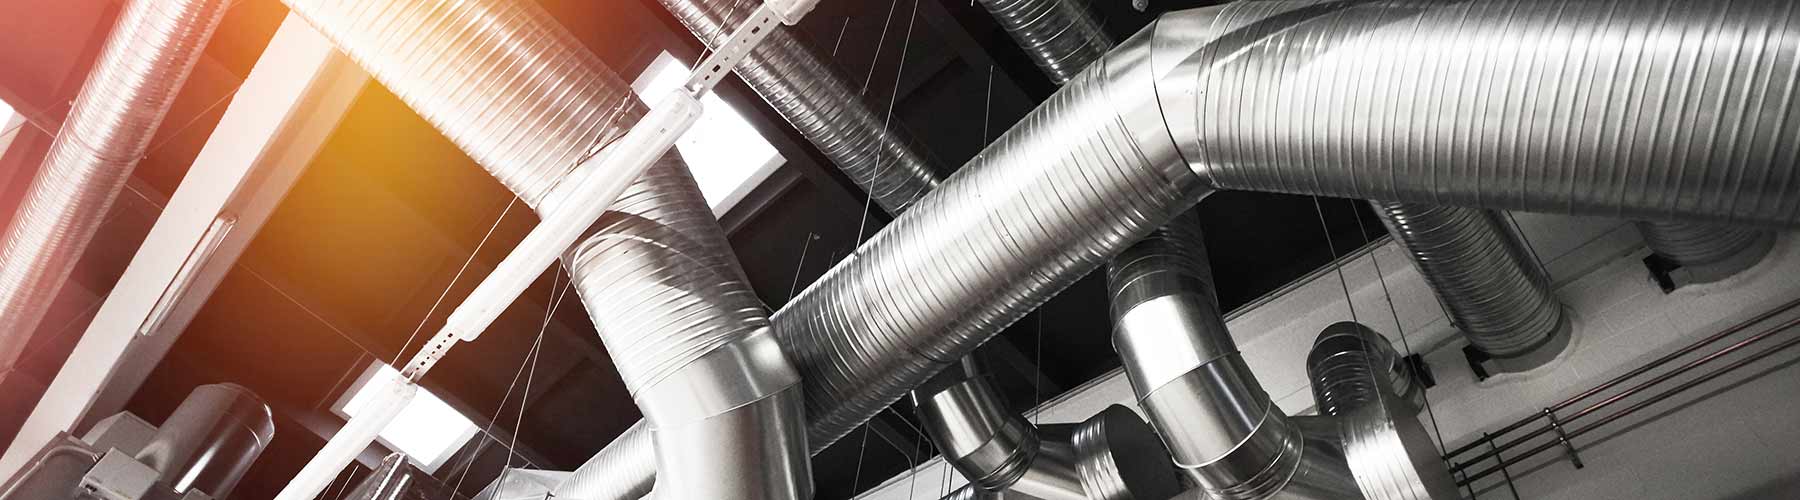 Heating ducts